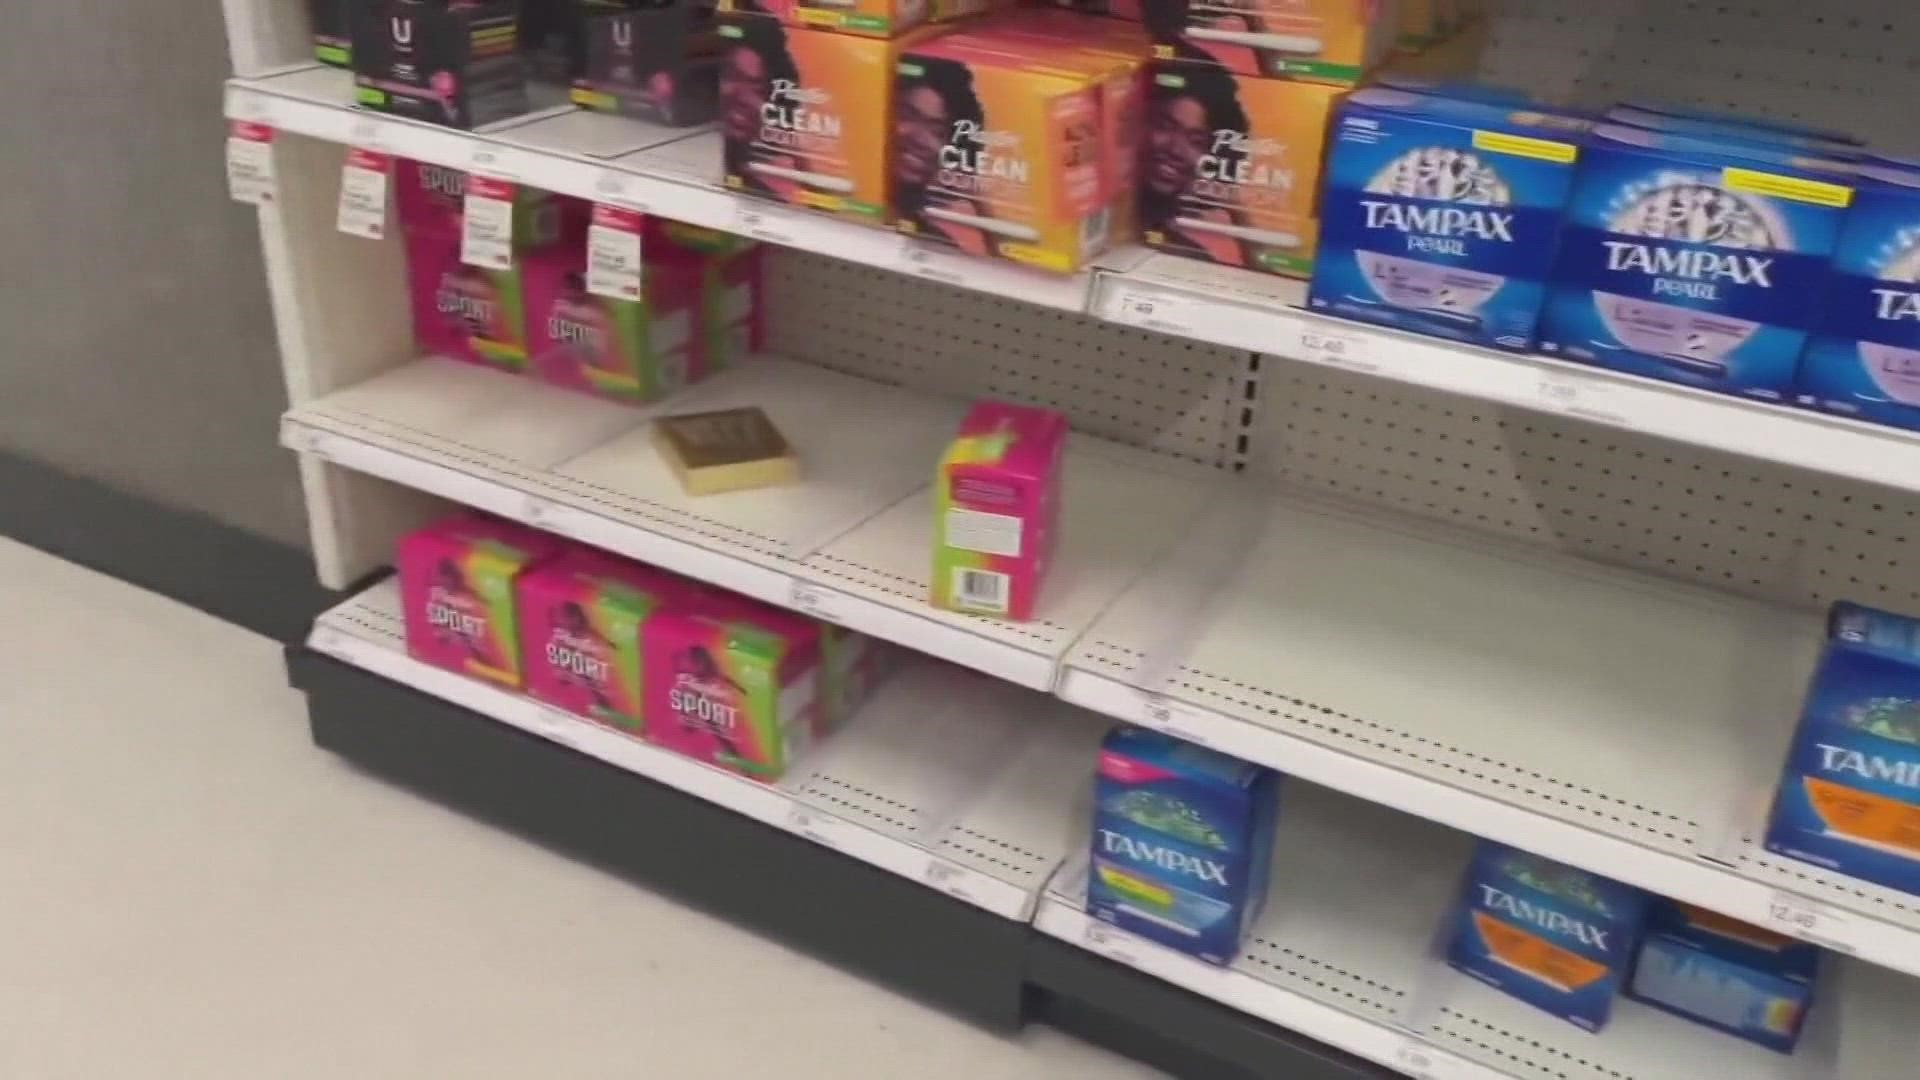 There have been shortages of almost everything for almost 2 years, and now tampons are being added to the list.